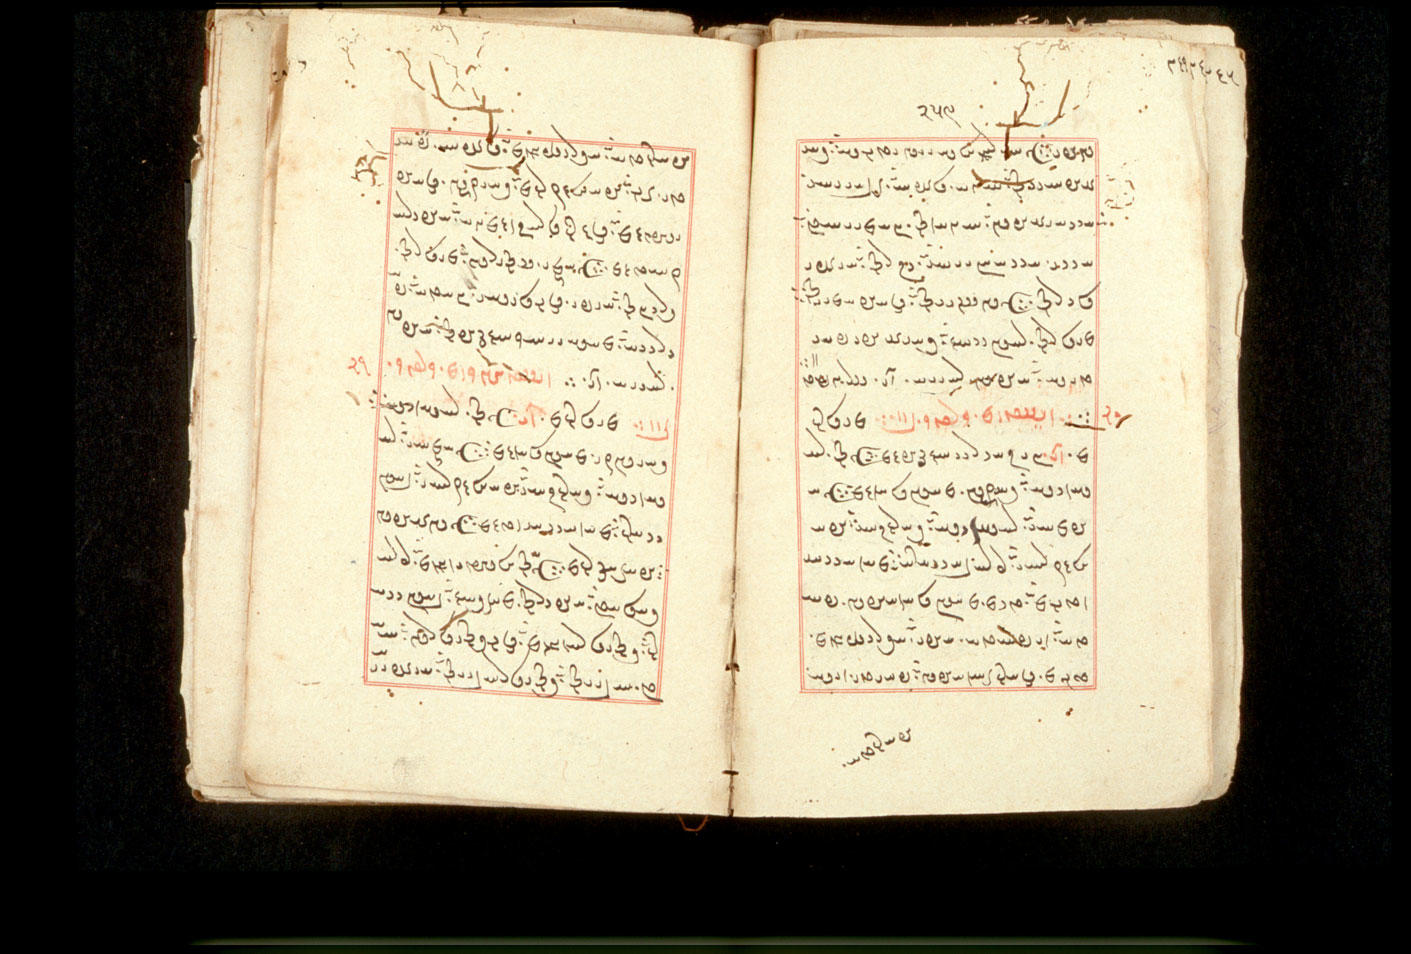 Folios 259v (right) and 260r (left)